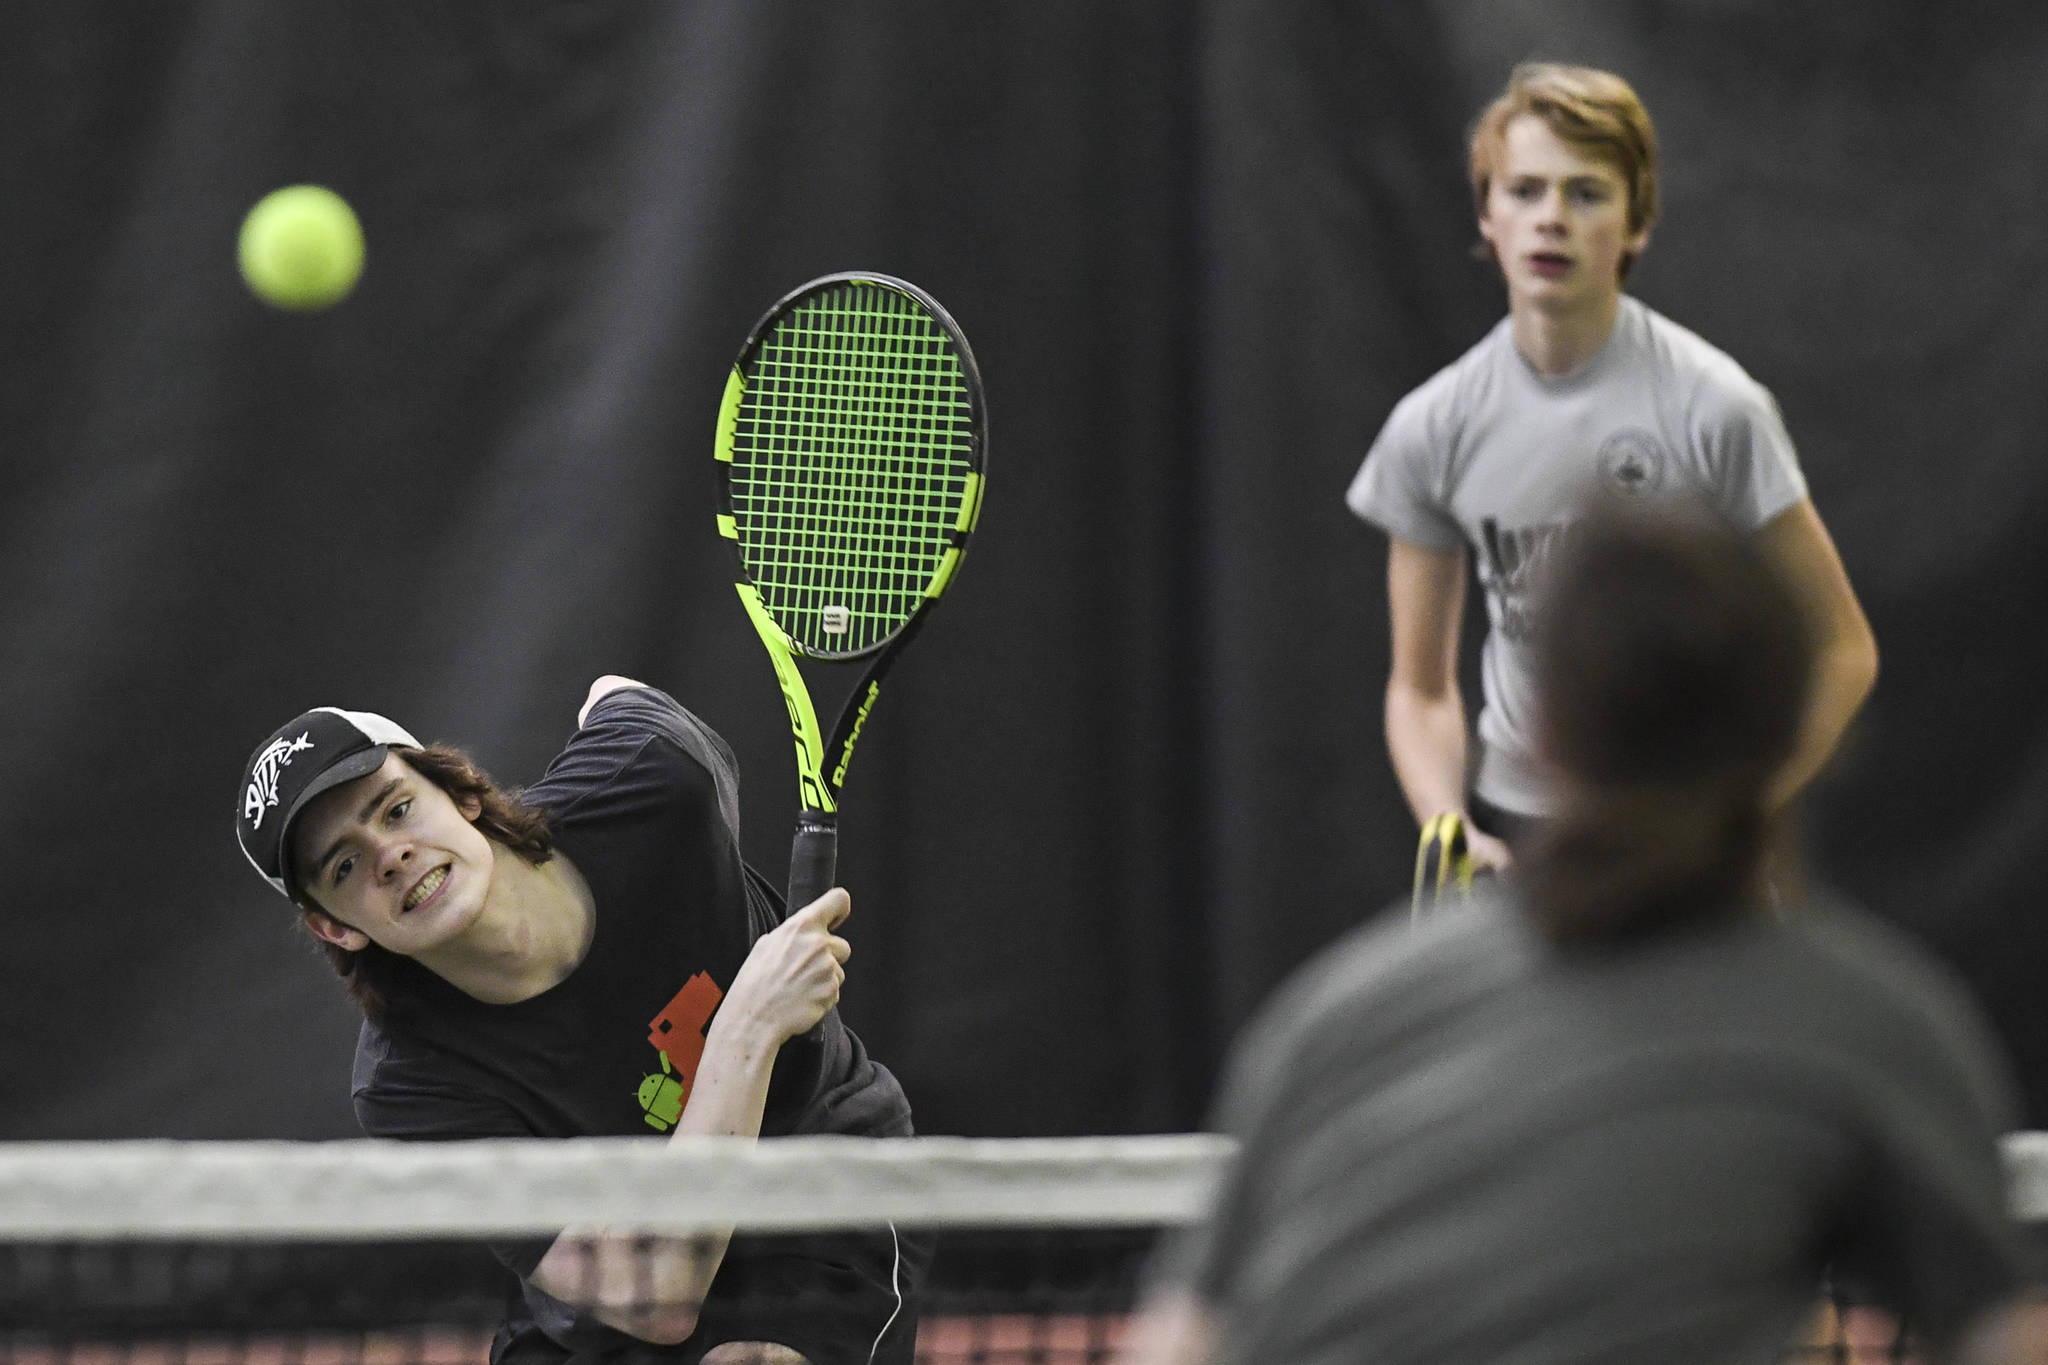 William Smoker, left, returns a volley in a boys doubles’ semifinal with partner Will Rehfeldt against Liam Penn, foreground, and Callan Smith during the Region V Tennis Tournament at The Alaska Club/JRC on Saturday, Sept. 28, 2019. Smoker/Rehfeldt won 7-6, 6-2.(Michael Penn | Juneau Empire)